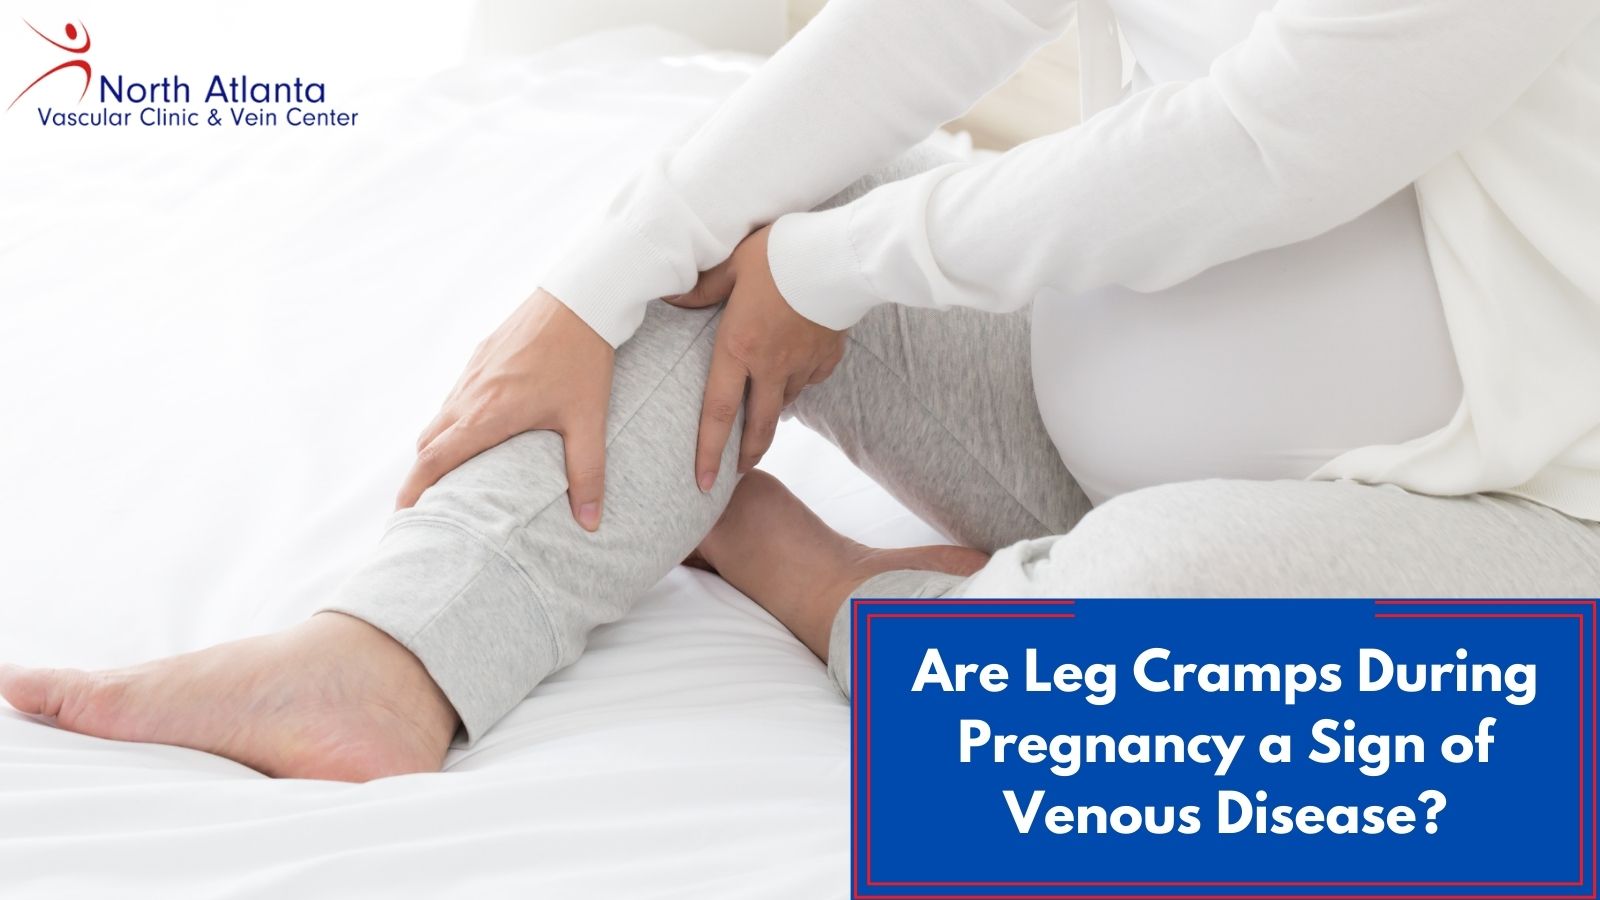 Are Leg Cramps During Pregnancy a Sign of Venous Disease?